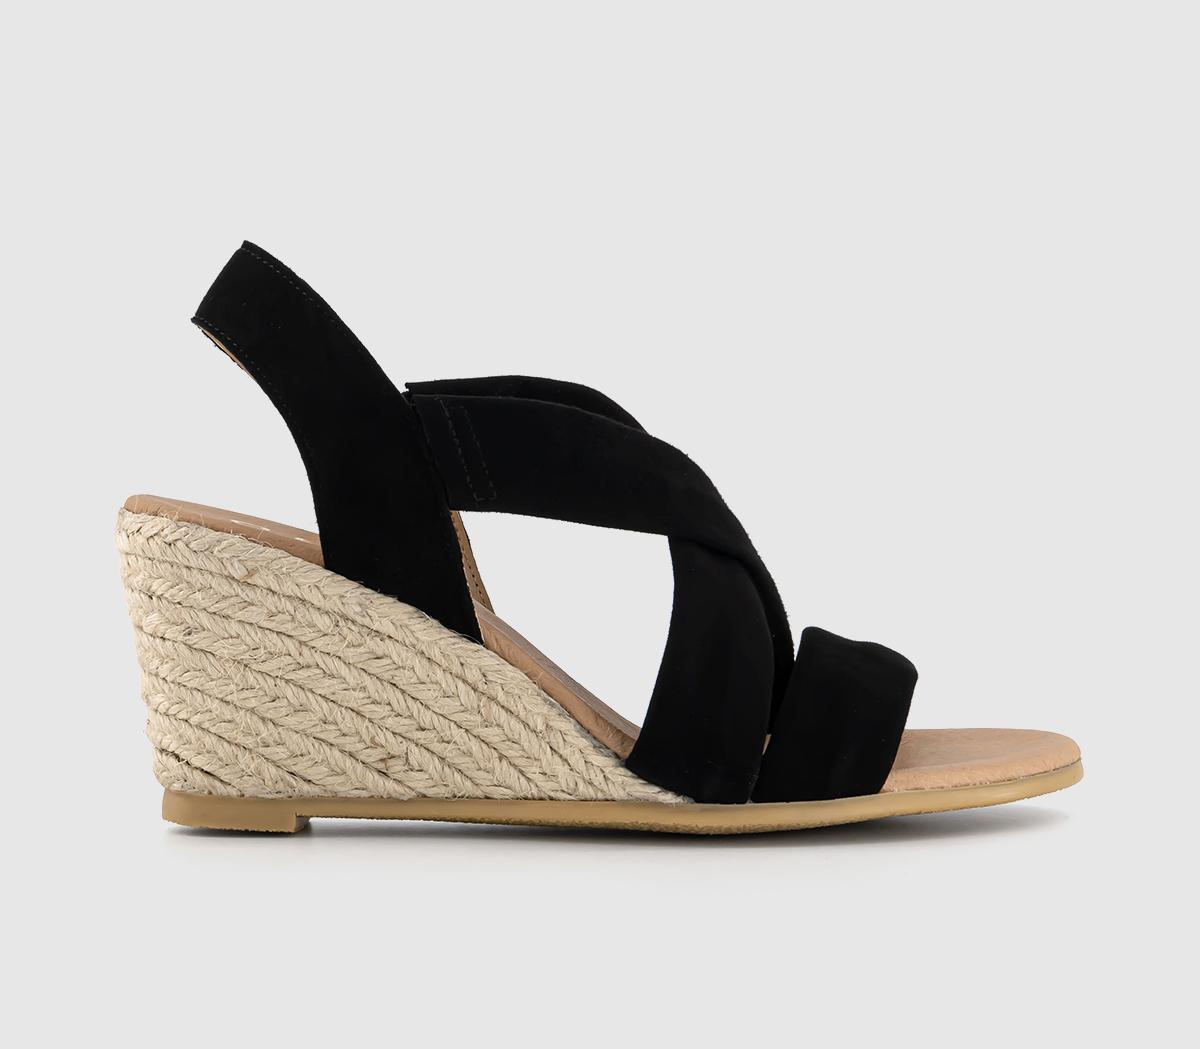 OFFICEMilly Cross Strap Slingback Espadrille Wedge SandalsBlack Suede